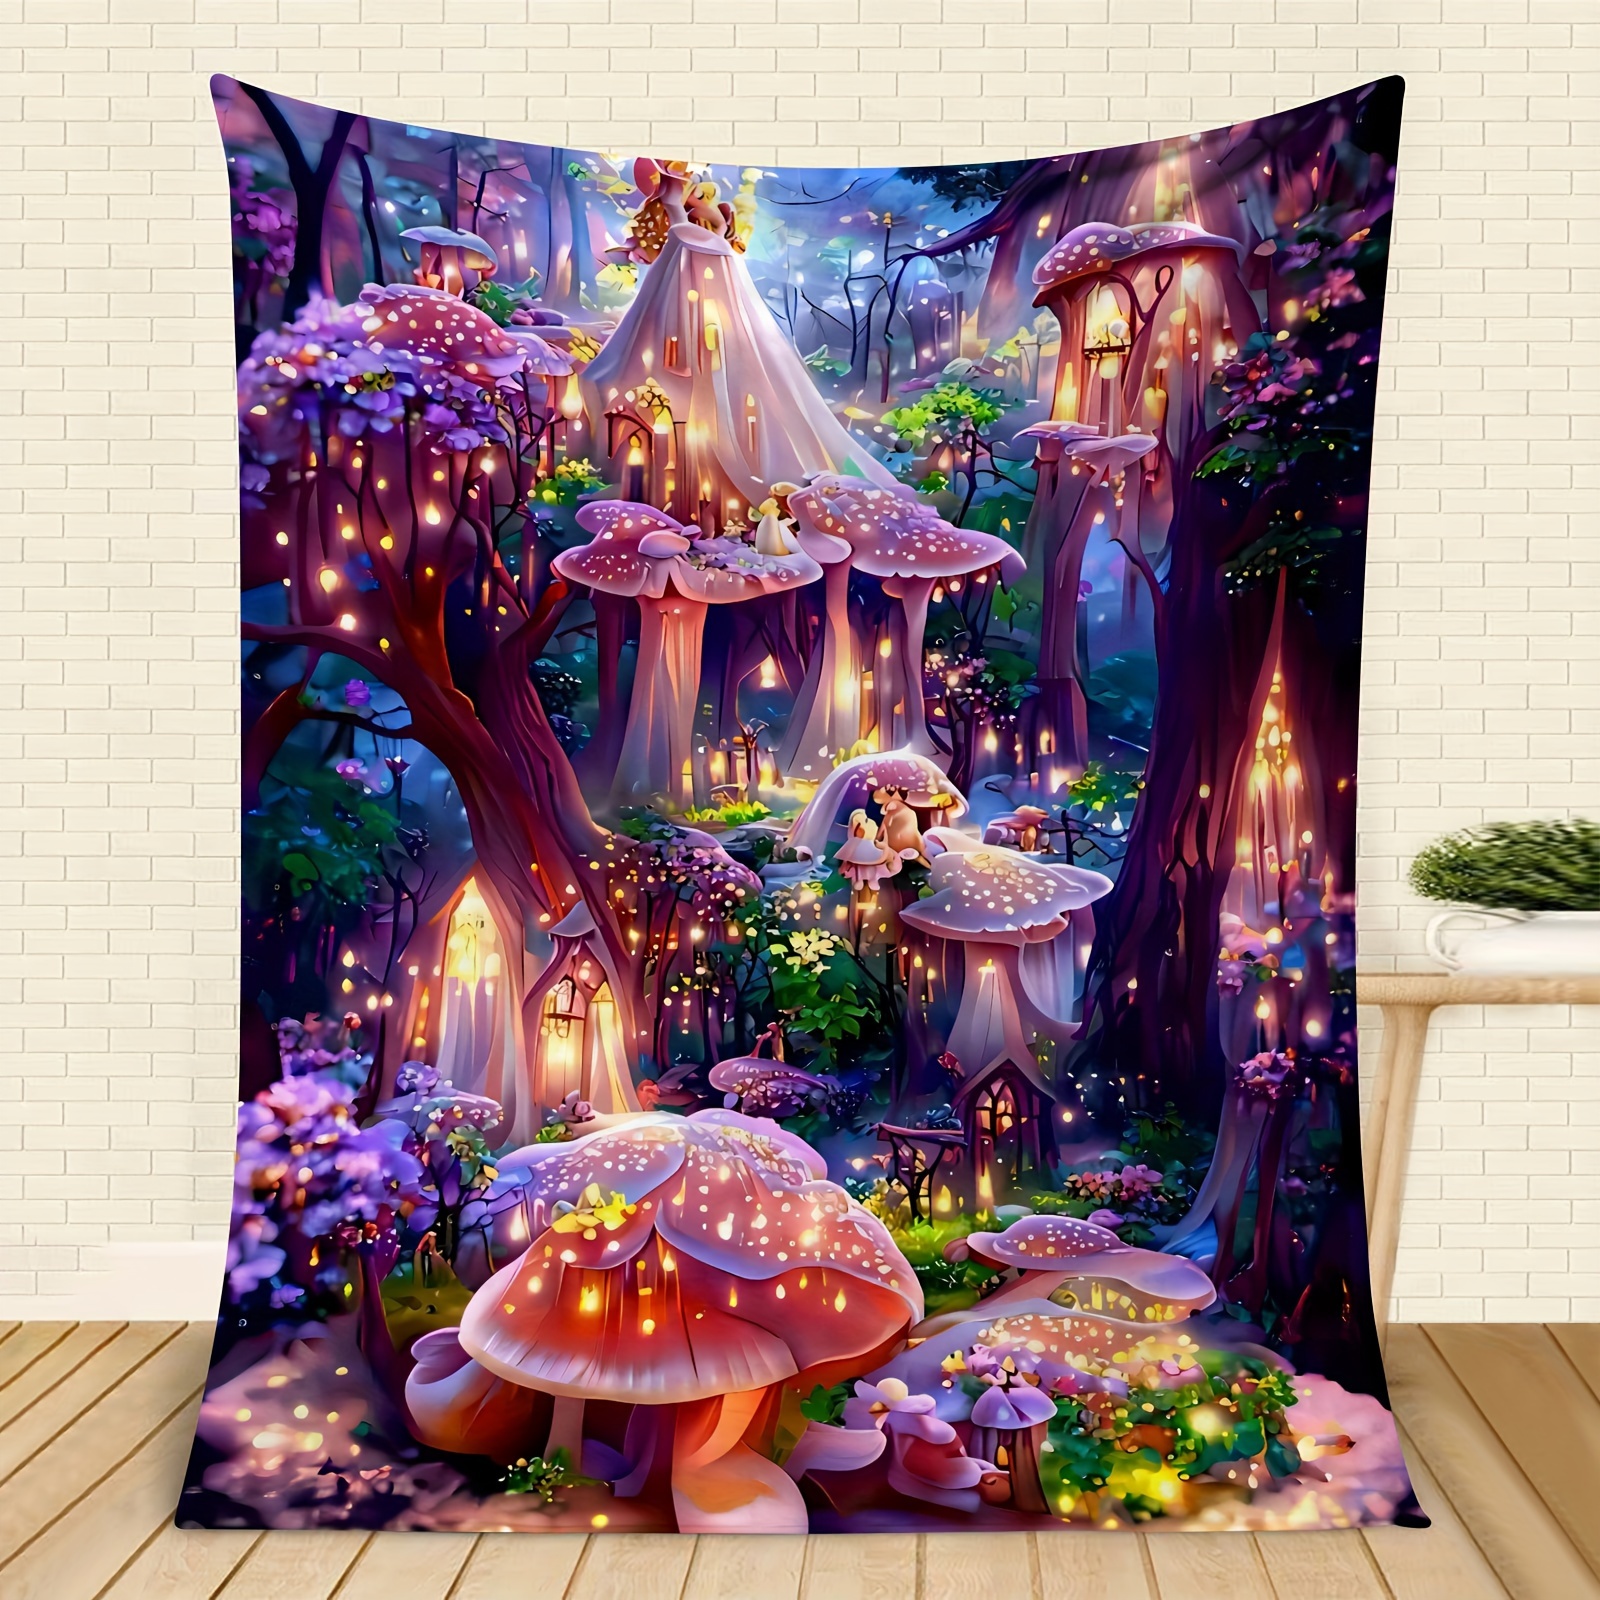 

1pc Dream Castl Blanket, Fairy Forest Print Soft Warm Throw Blanket Nap Blanket For Couch Sofa Office Bed Camping Travel, Multi-purpose Gift Blanket